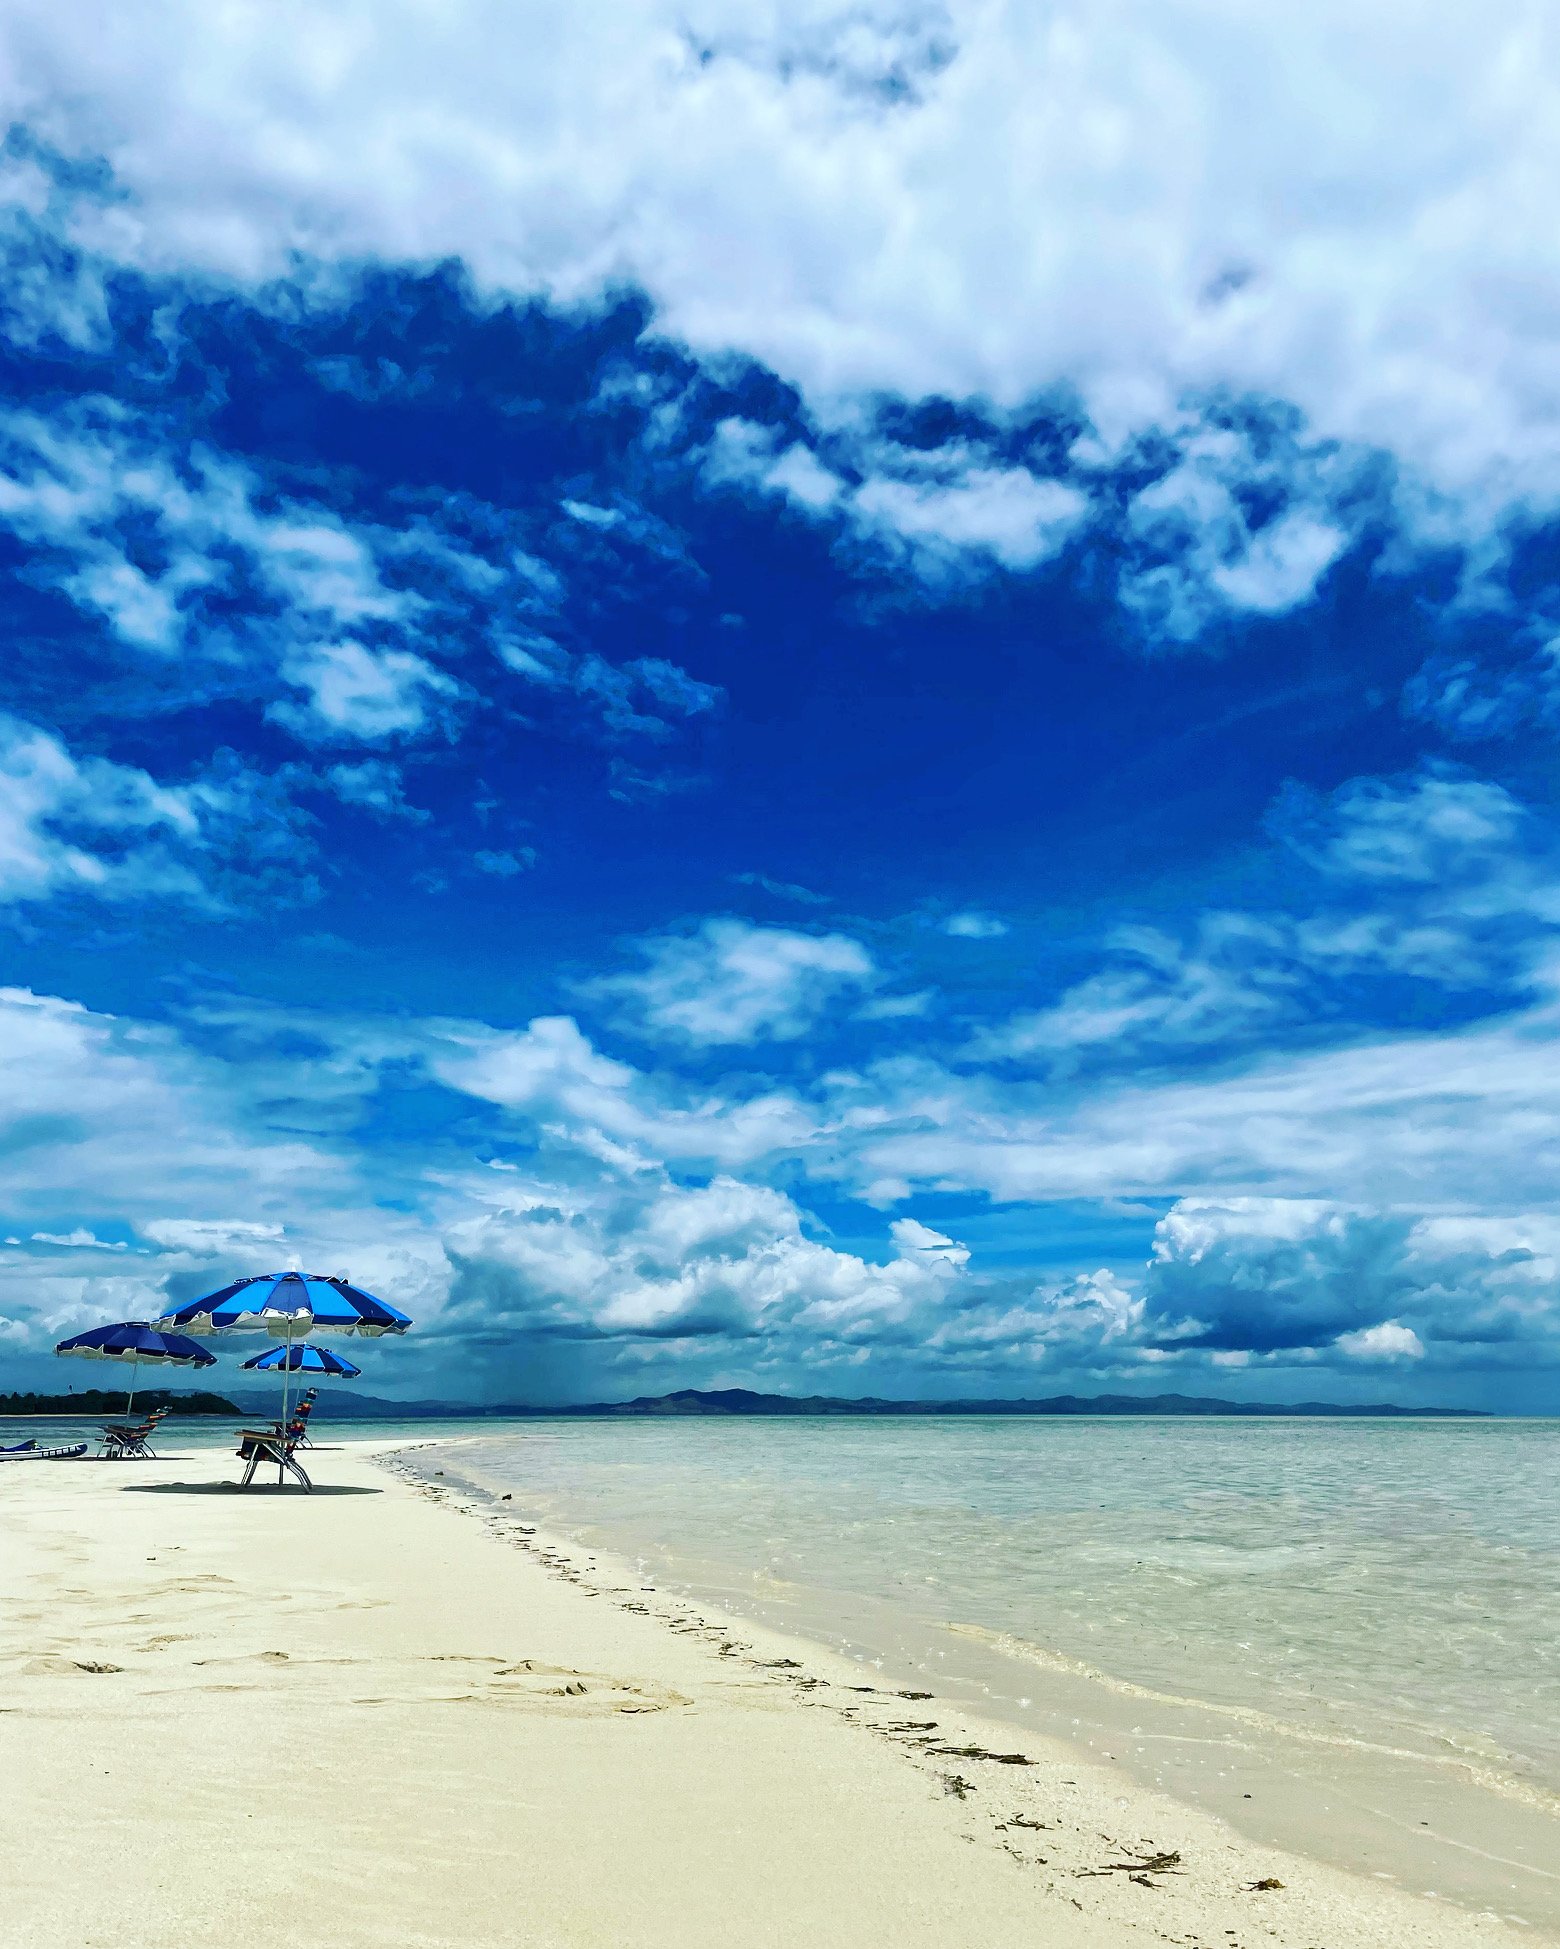 Copy of Scenes from a sand bar in the Mamanuca Island chain that will vanish with the tide less than an hour after the photo was taken.JPG.JPG